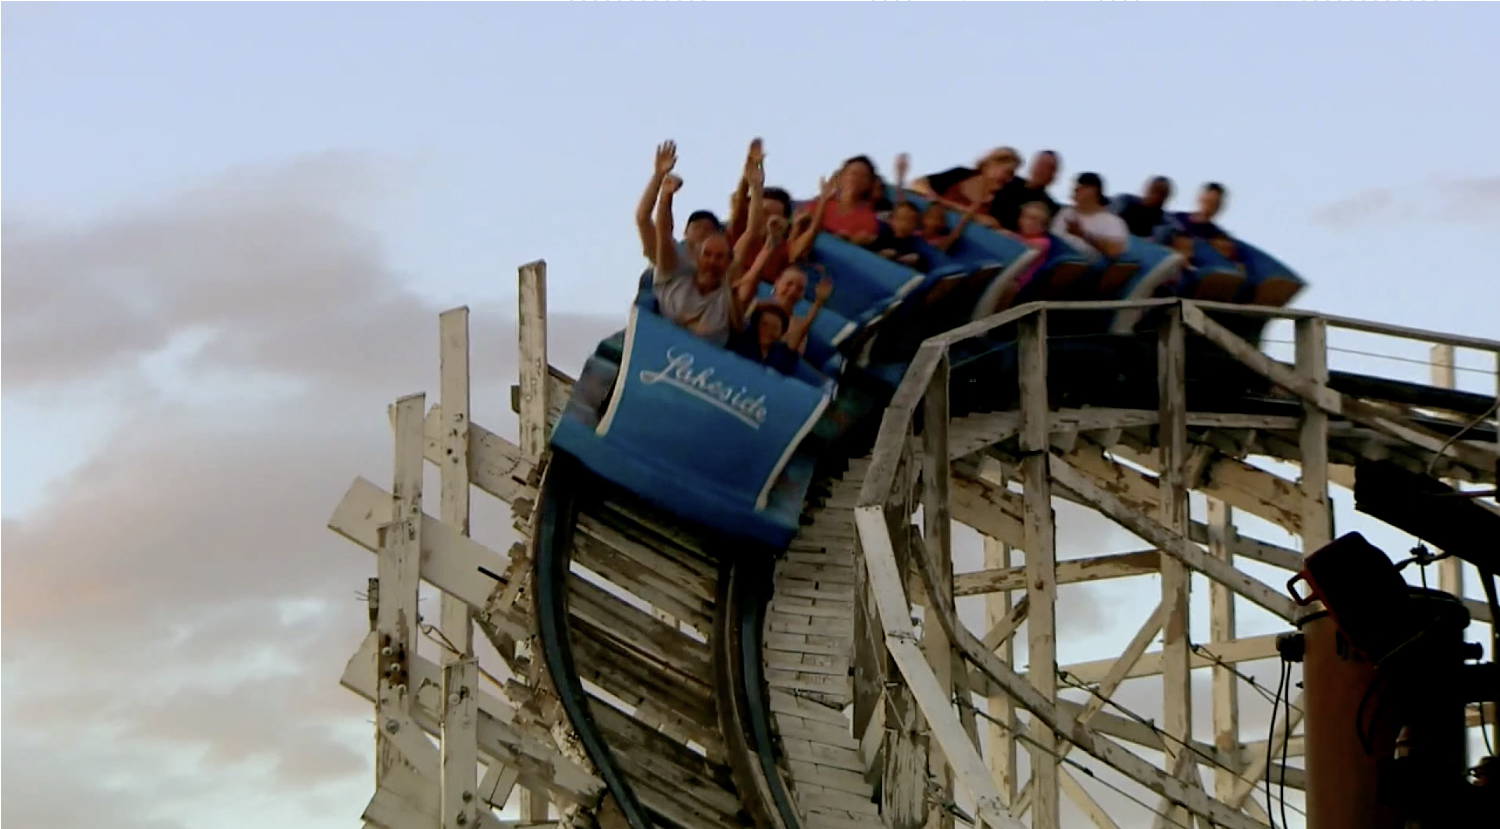 Man sues Lakeside Amusement Park for roller coaster injury